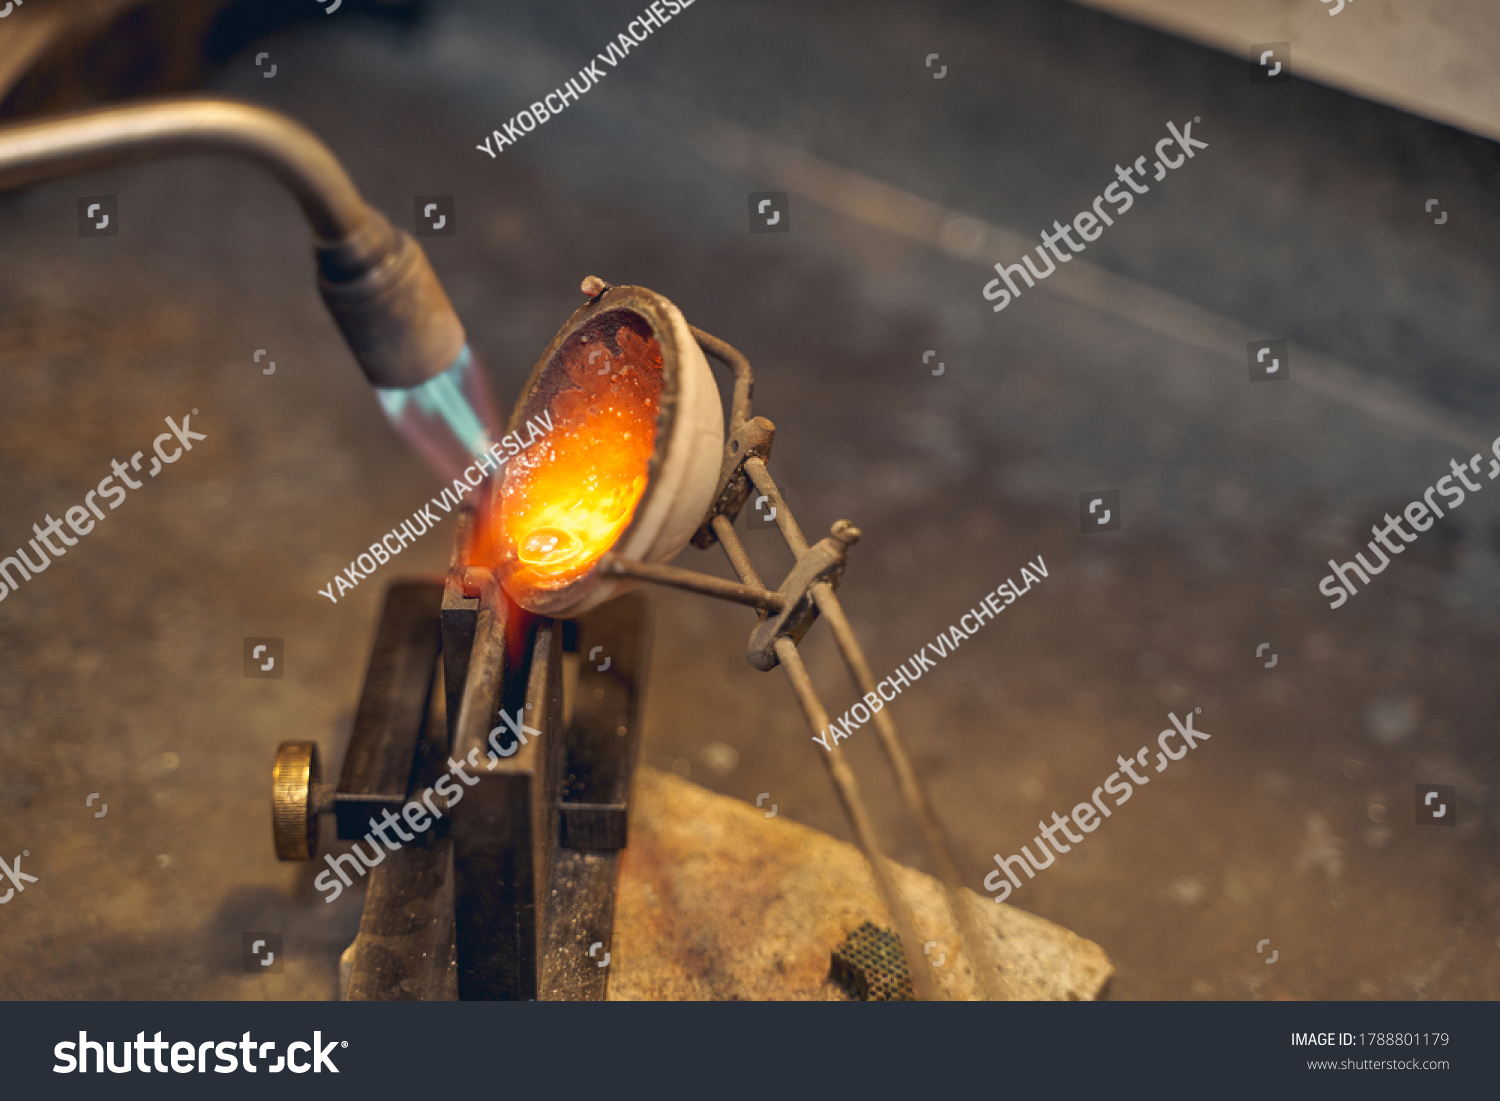 Smelted metal being poured by an experienced gold refiner from the crucible into a mold #1788801179